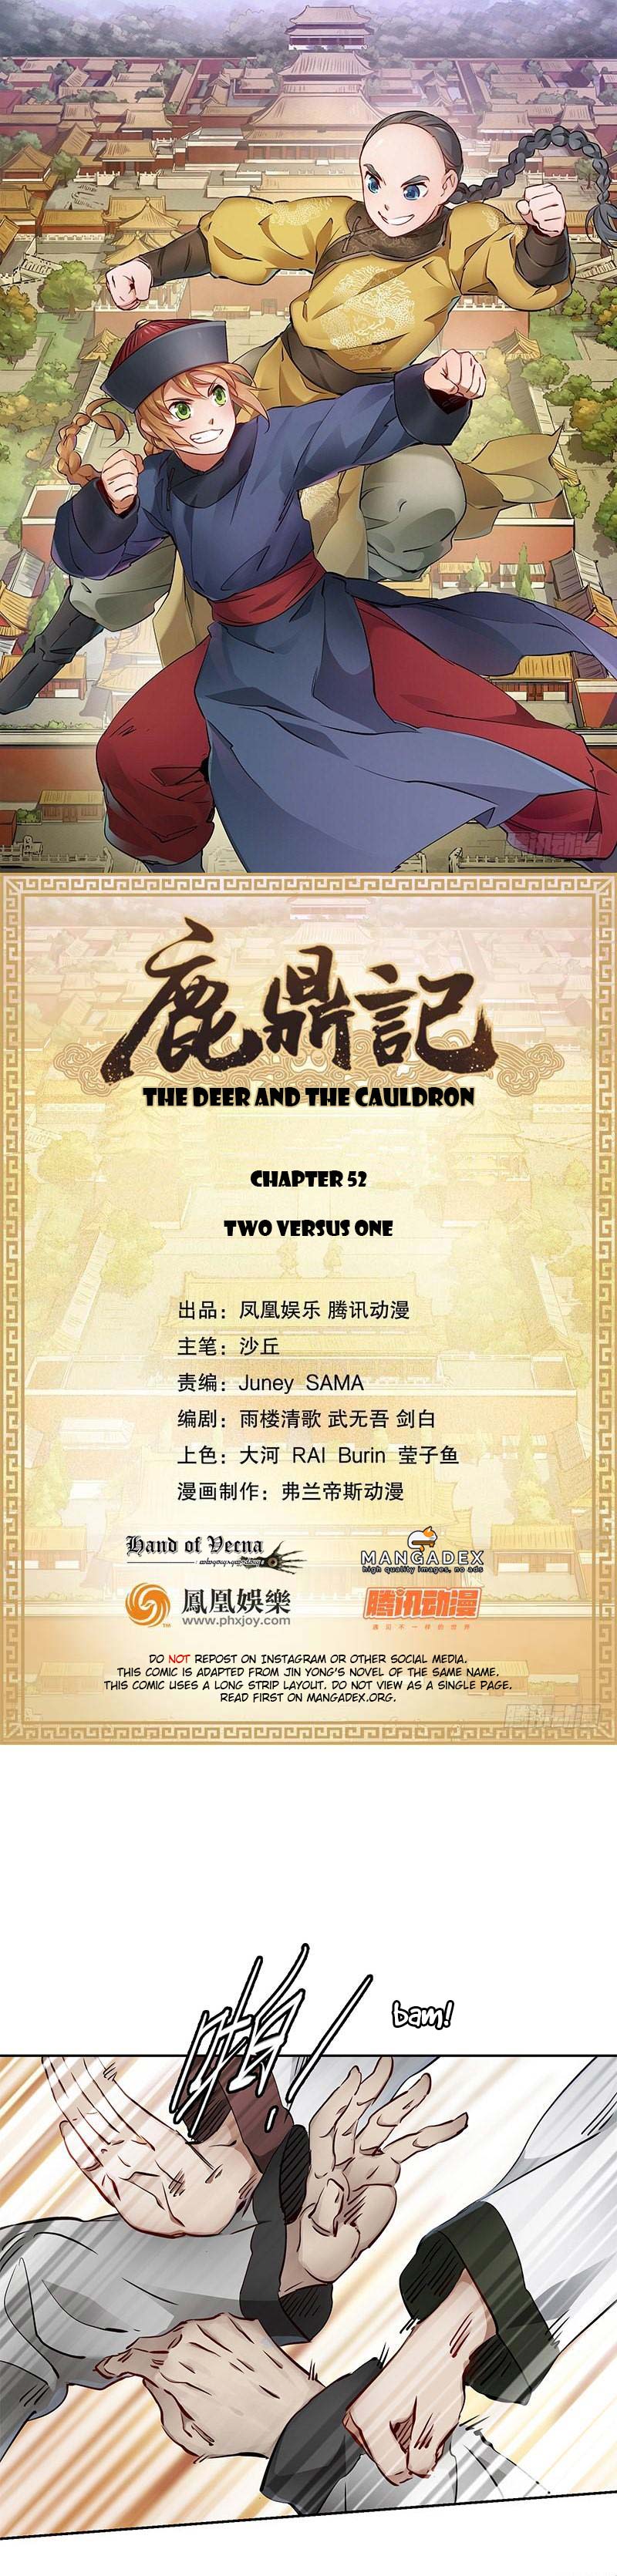 The Deer and the Cauldron Ch. 52 Two Versus One